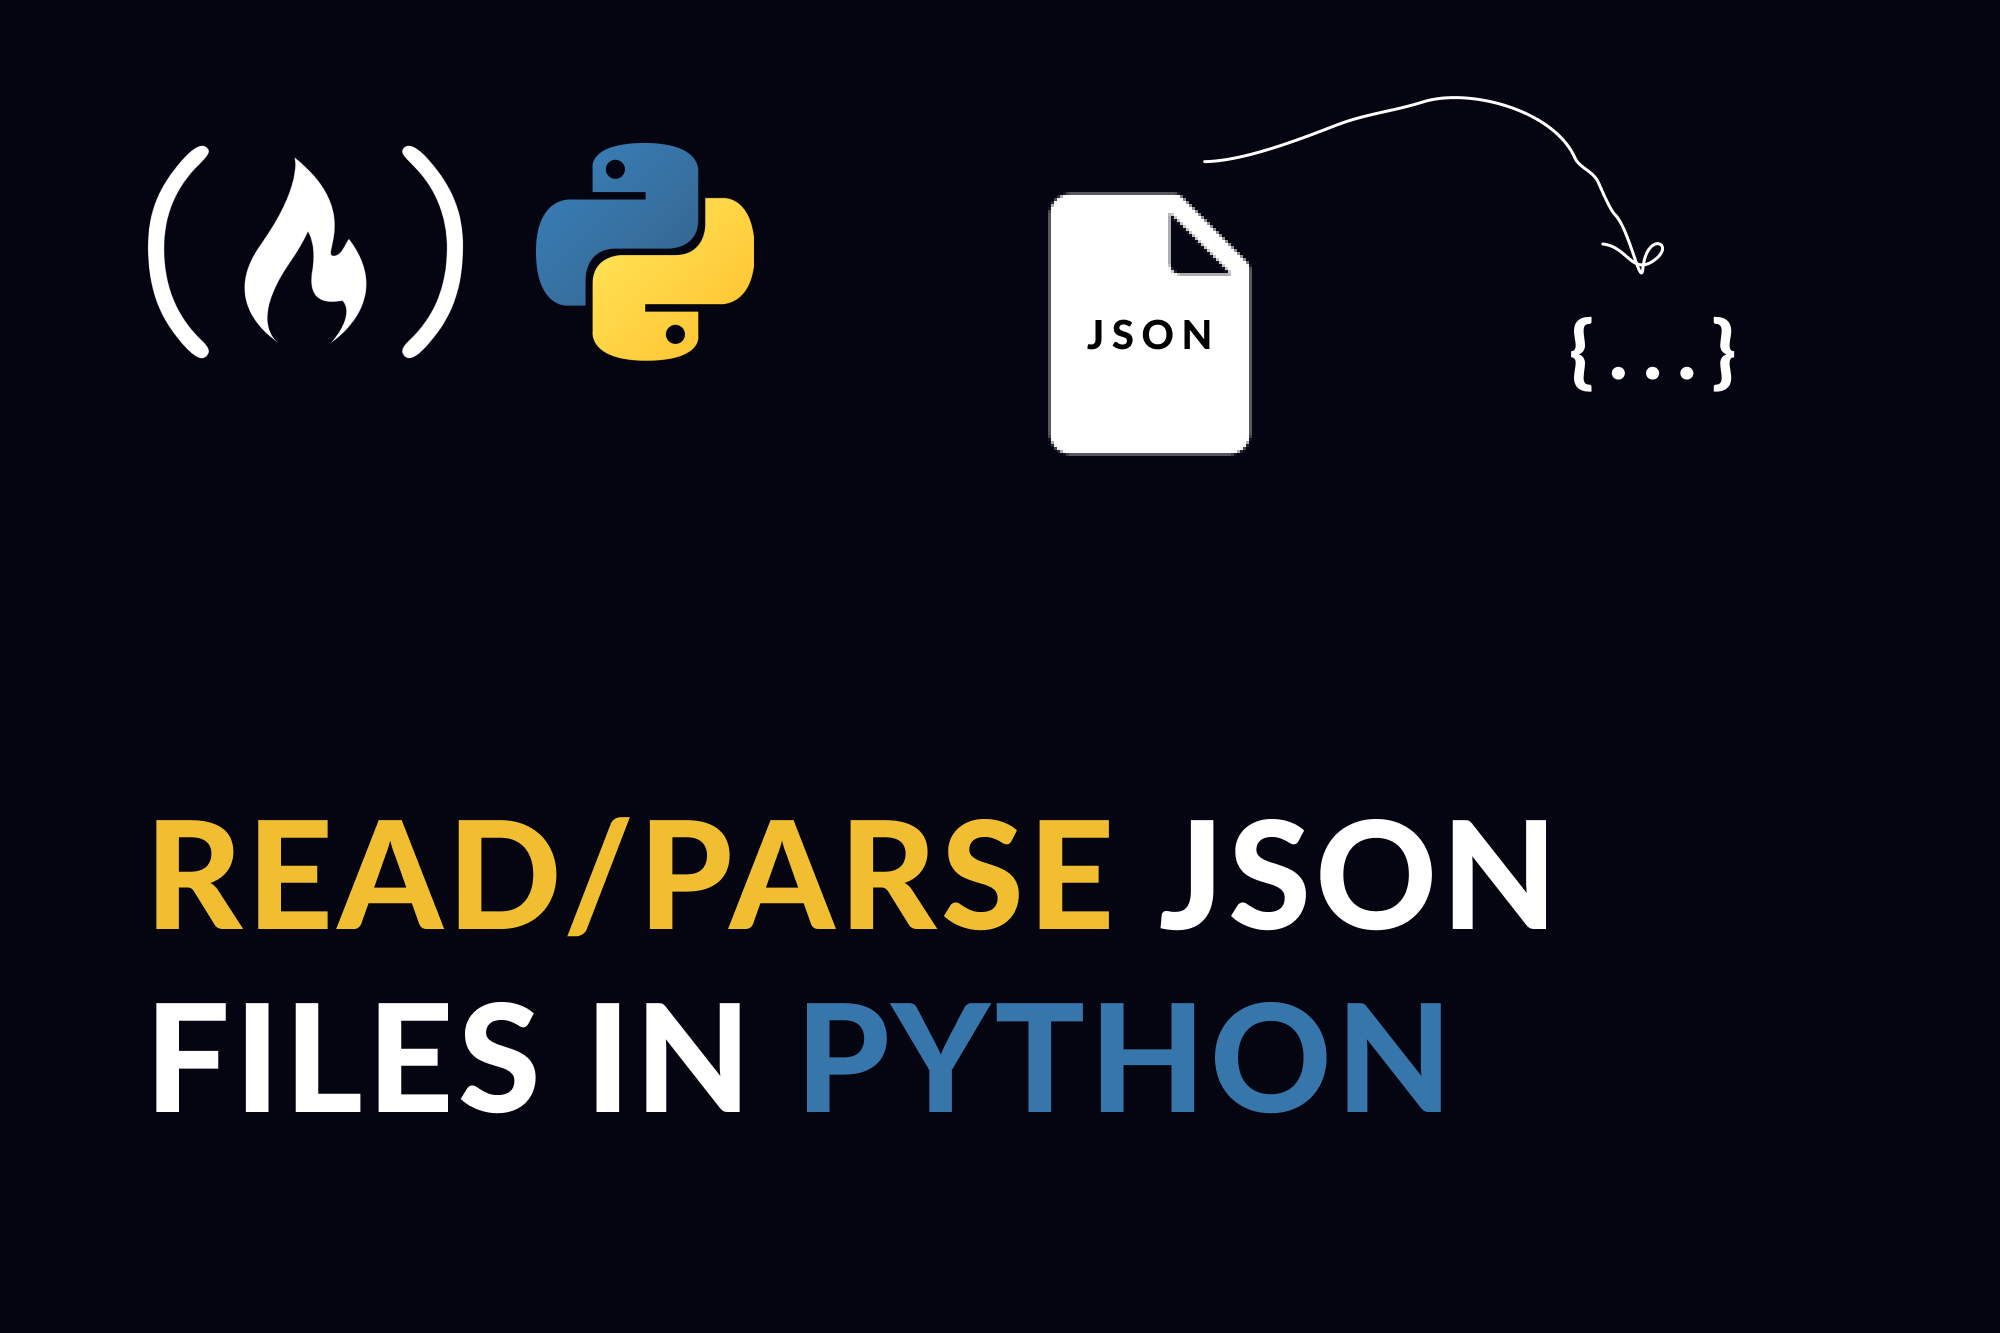 Loading a JSON File in Python - How to Read and Parse JSON